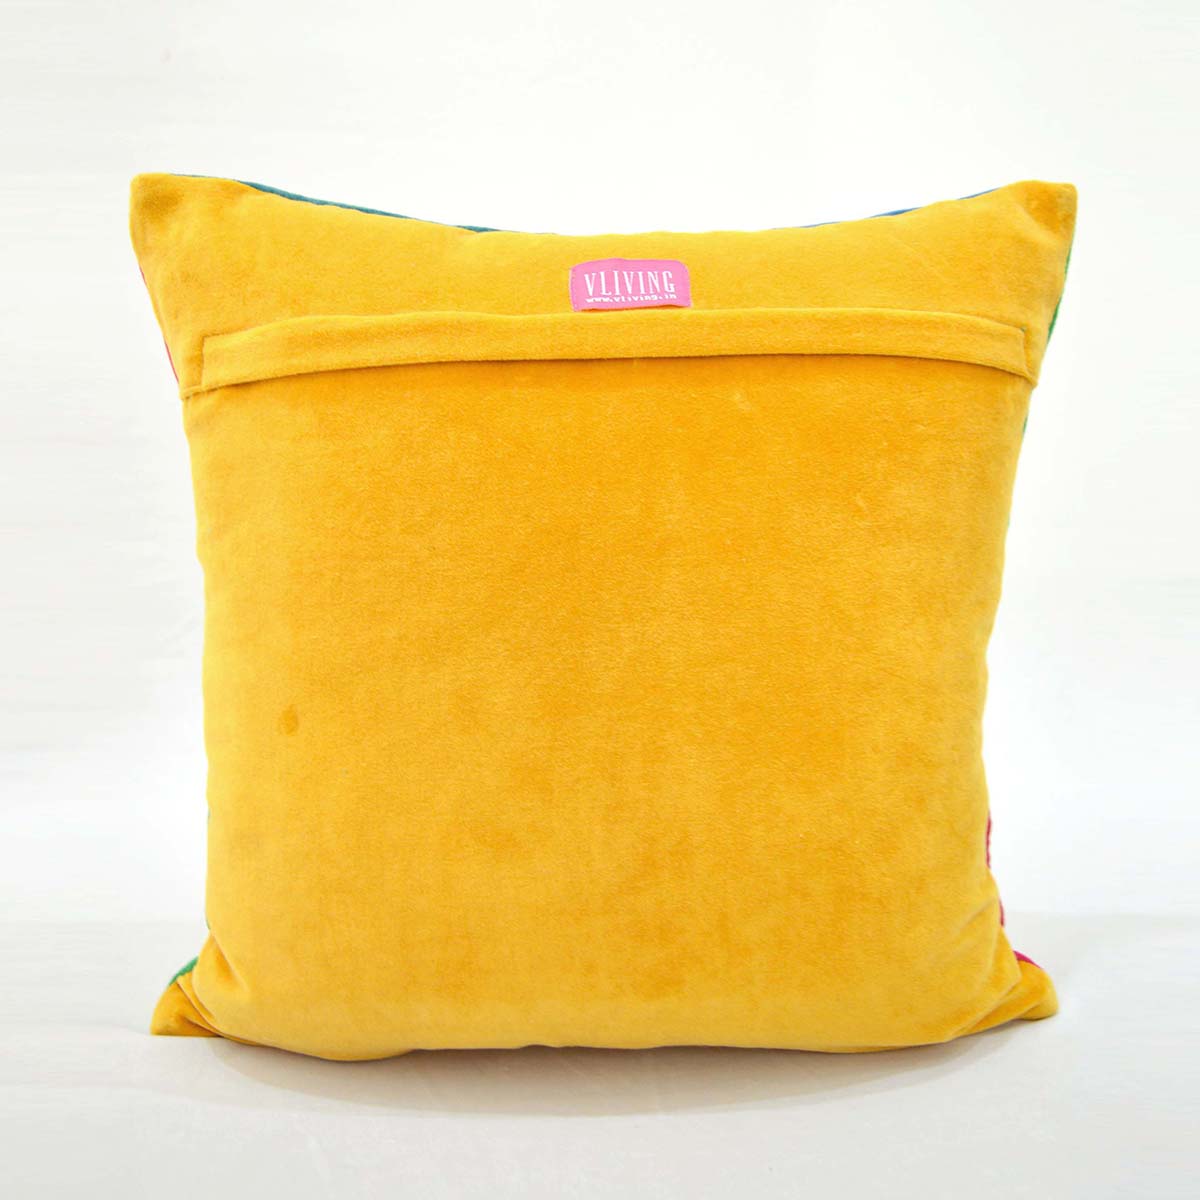 Carnival - Yellow pillow cover, multicolour hand embroidery, bohemian decor cushion cover